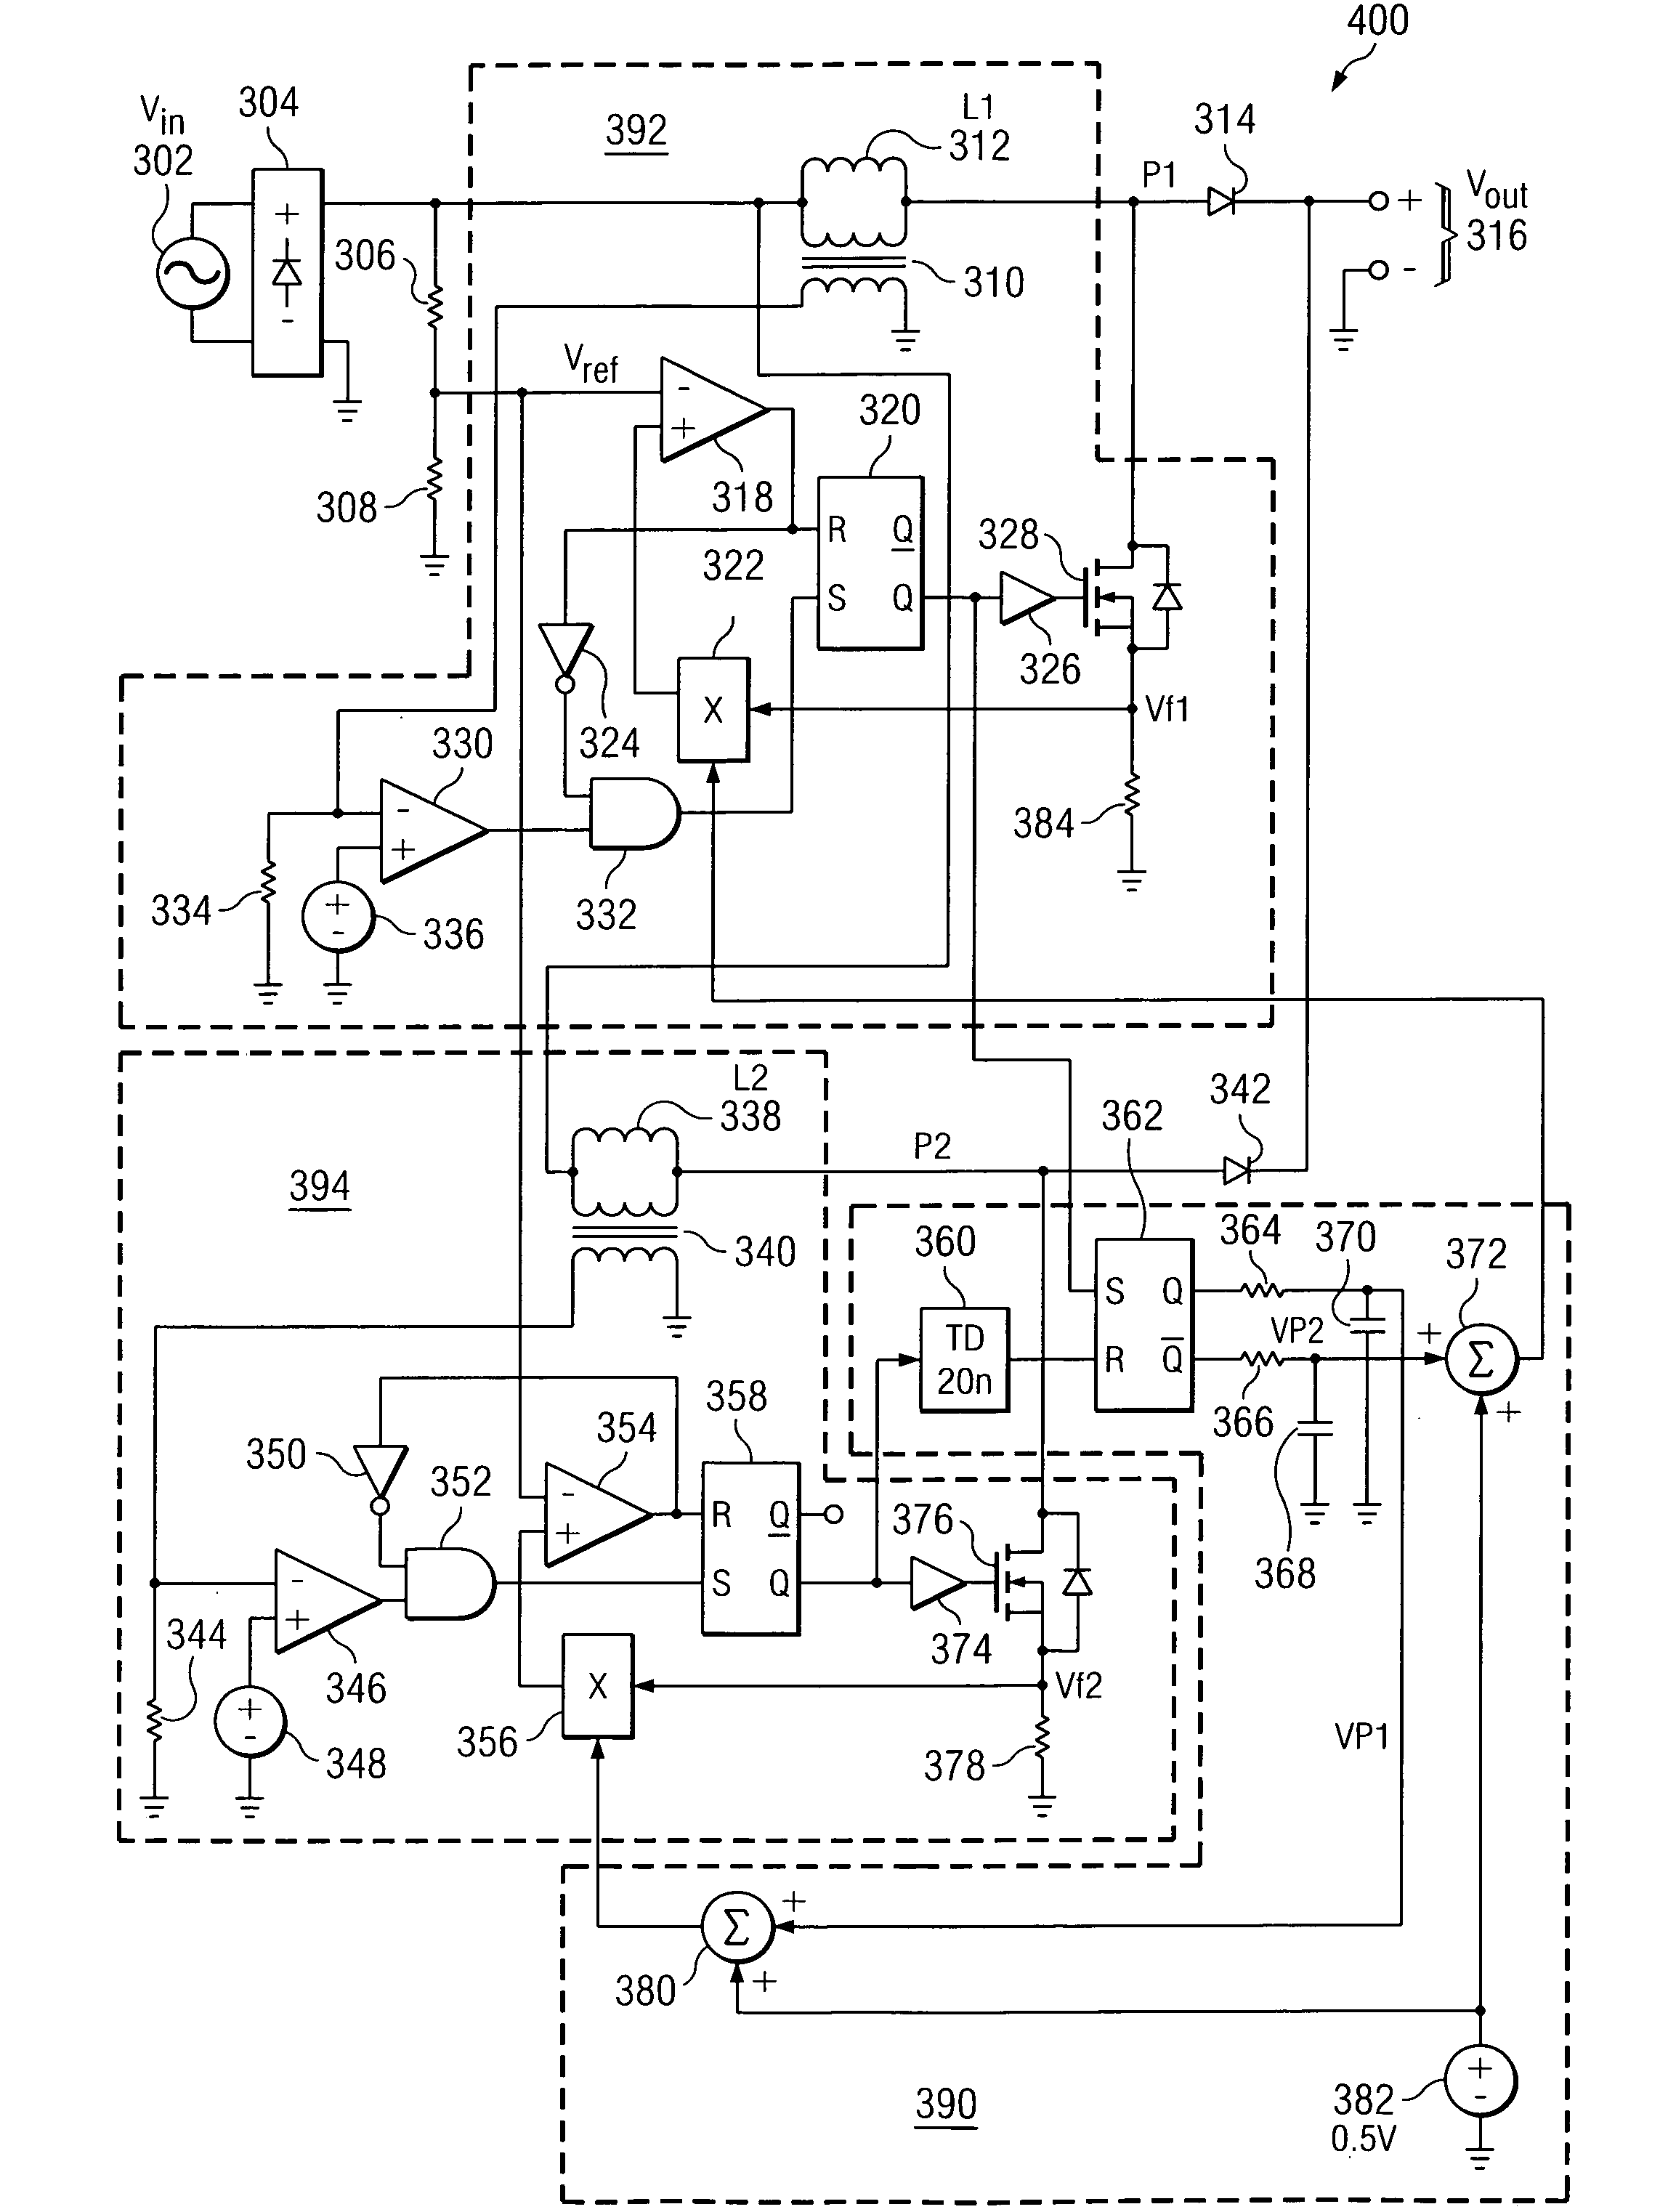 Method and apparatus for power converters having phases spaced at desired phase angles